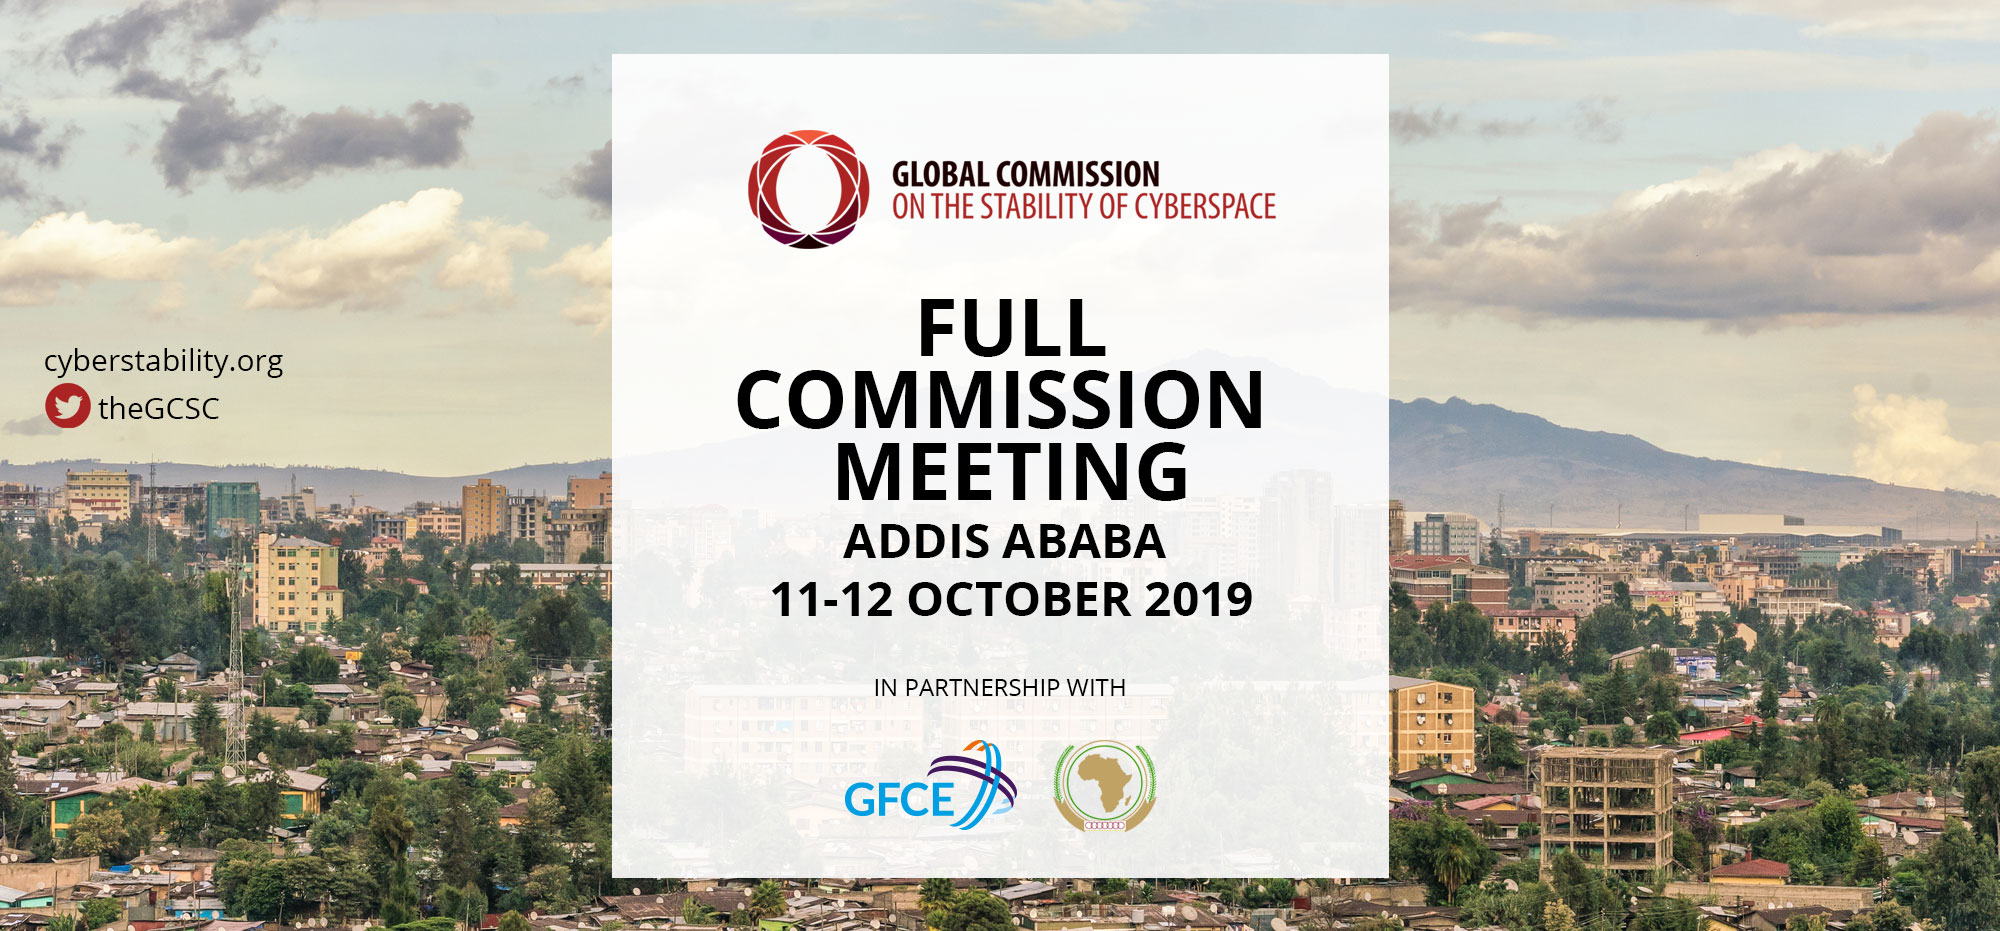 Global Commission Meeting in Addis Ababa, Ethiopia